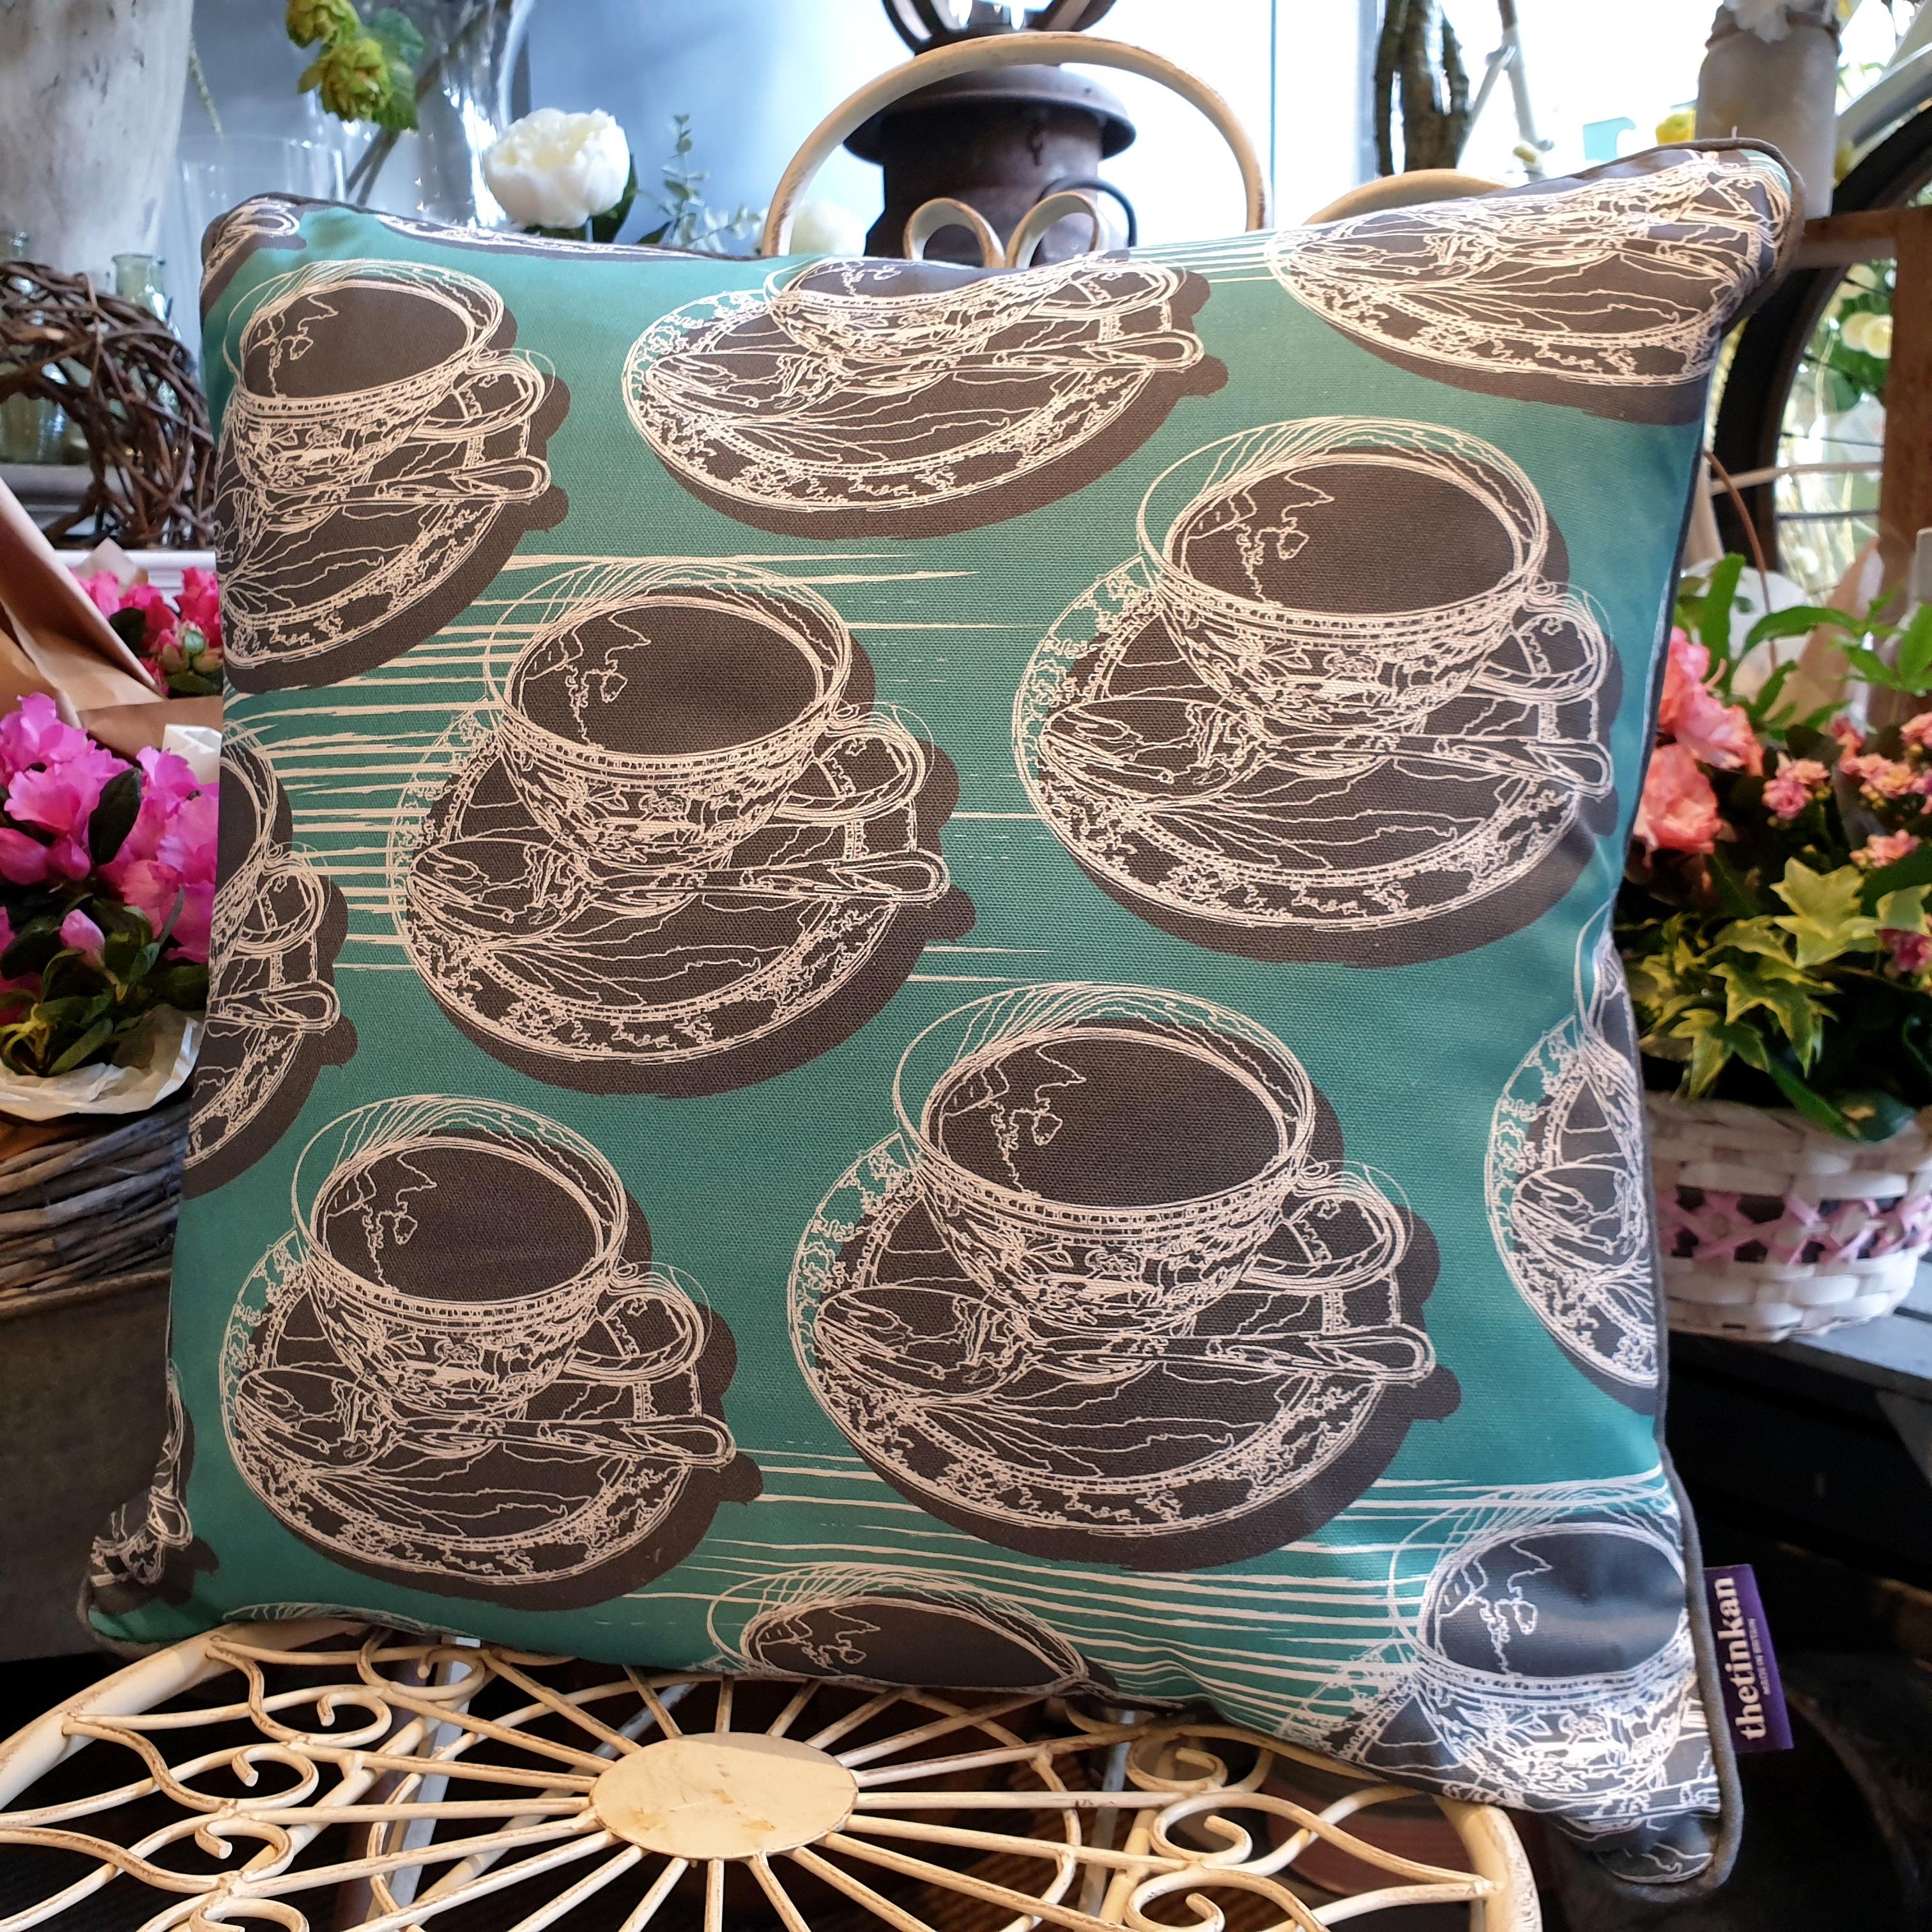 Double-sided aqua teal 51cm square retro Afternoon Tea cushion with artistic white shards and grey handcrafted piping designed by thetinkan. White traced outline of multiple British teacups and saucers each colour filled in charcoal grey. Available with an optional luxury cushion inner pad. VIEW PRODUCT >>